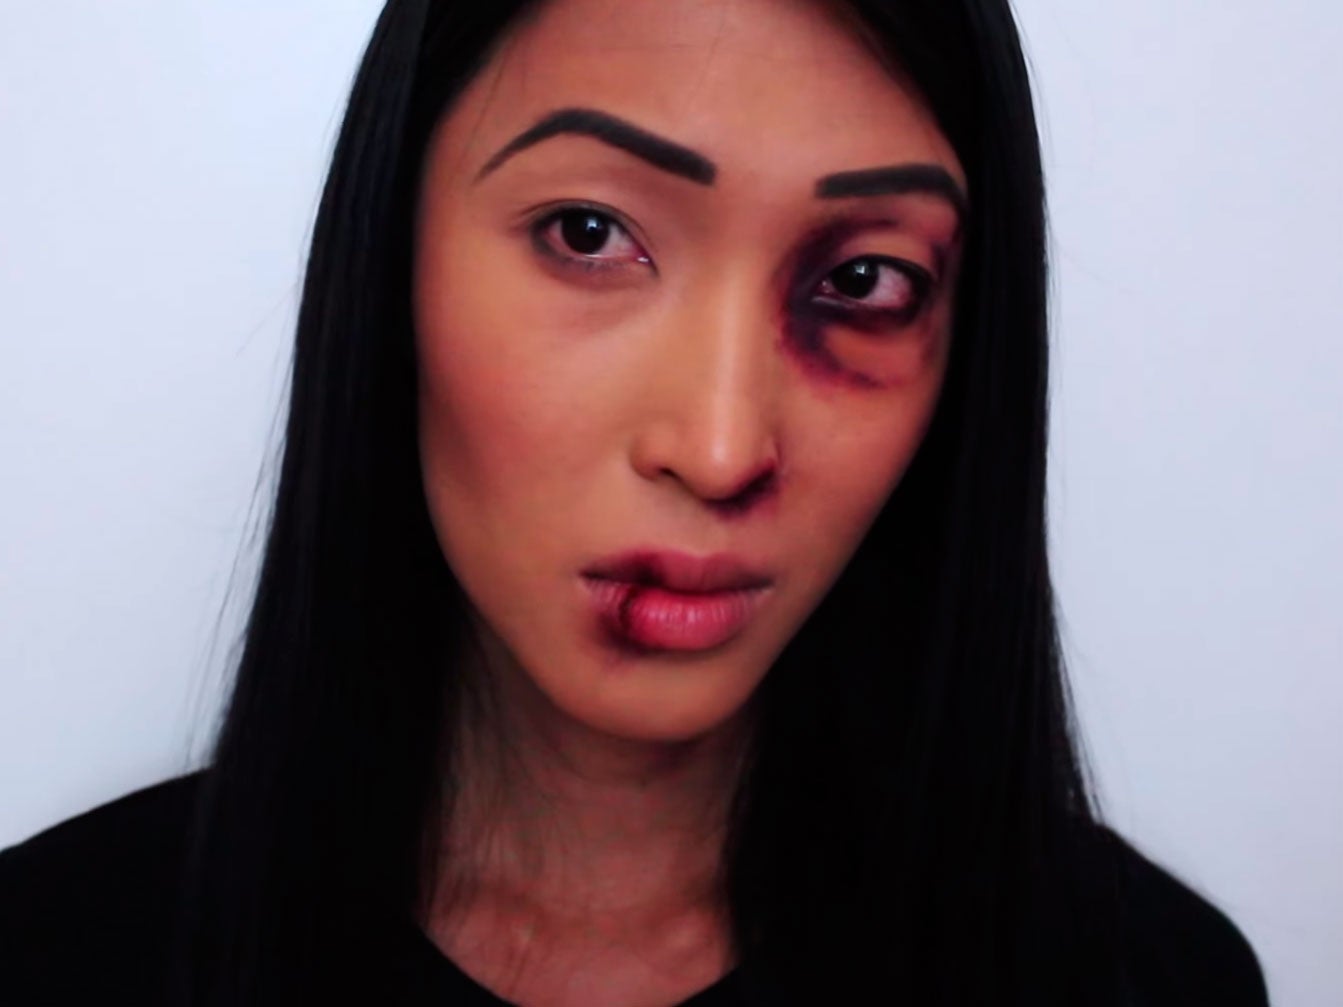 YouTuber Julie Vu posted the video to draw attention to the problem of domestic violence against men and women.